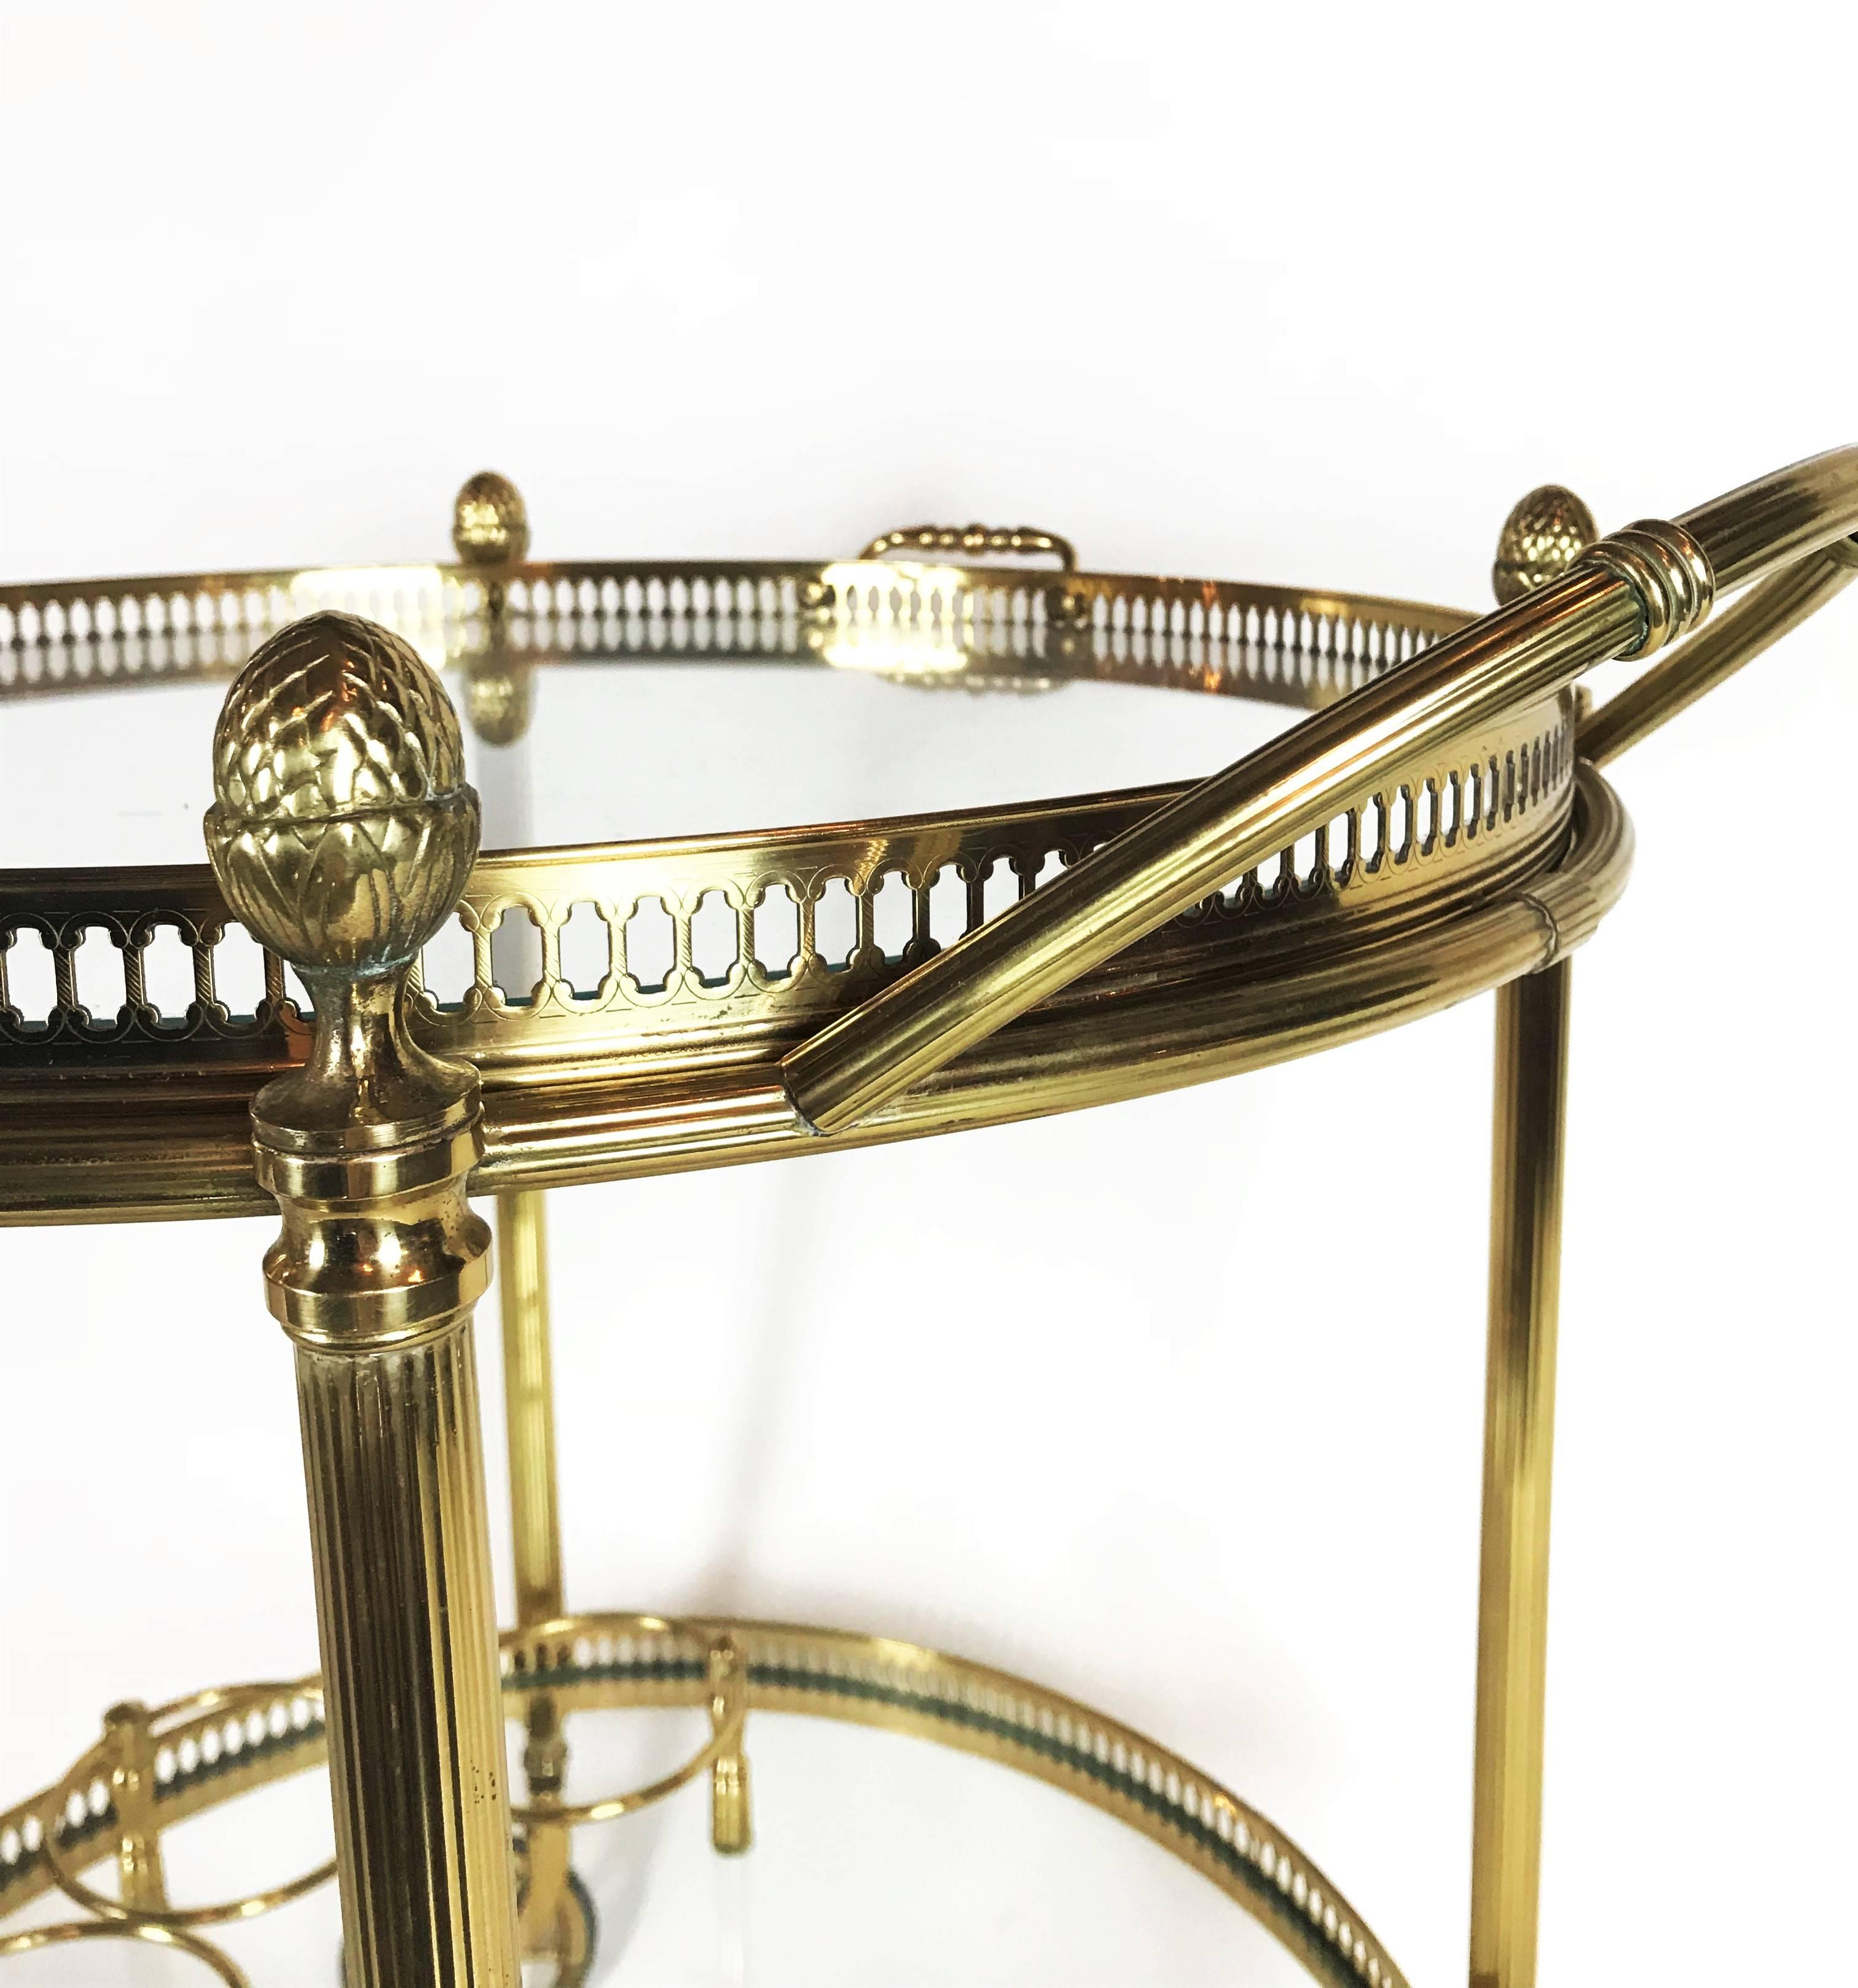 Neoclassical serving table in heavy gilt brass by Maison Baguès Paris. Maison Baguès is renowned for fine brass objects and lights since its establishment in 1860 the idiosyncratic genius Armand-Albert Rateau used Maison Baguès accessories to